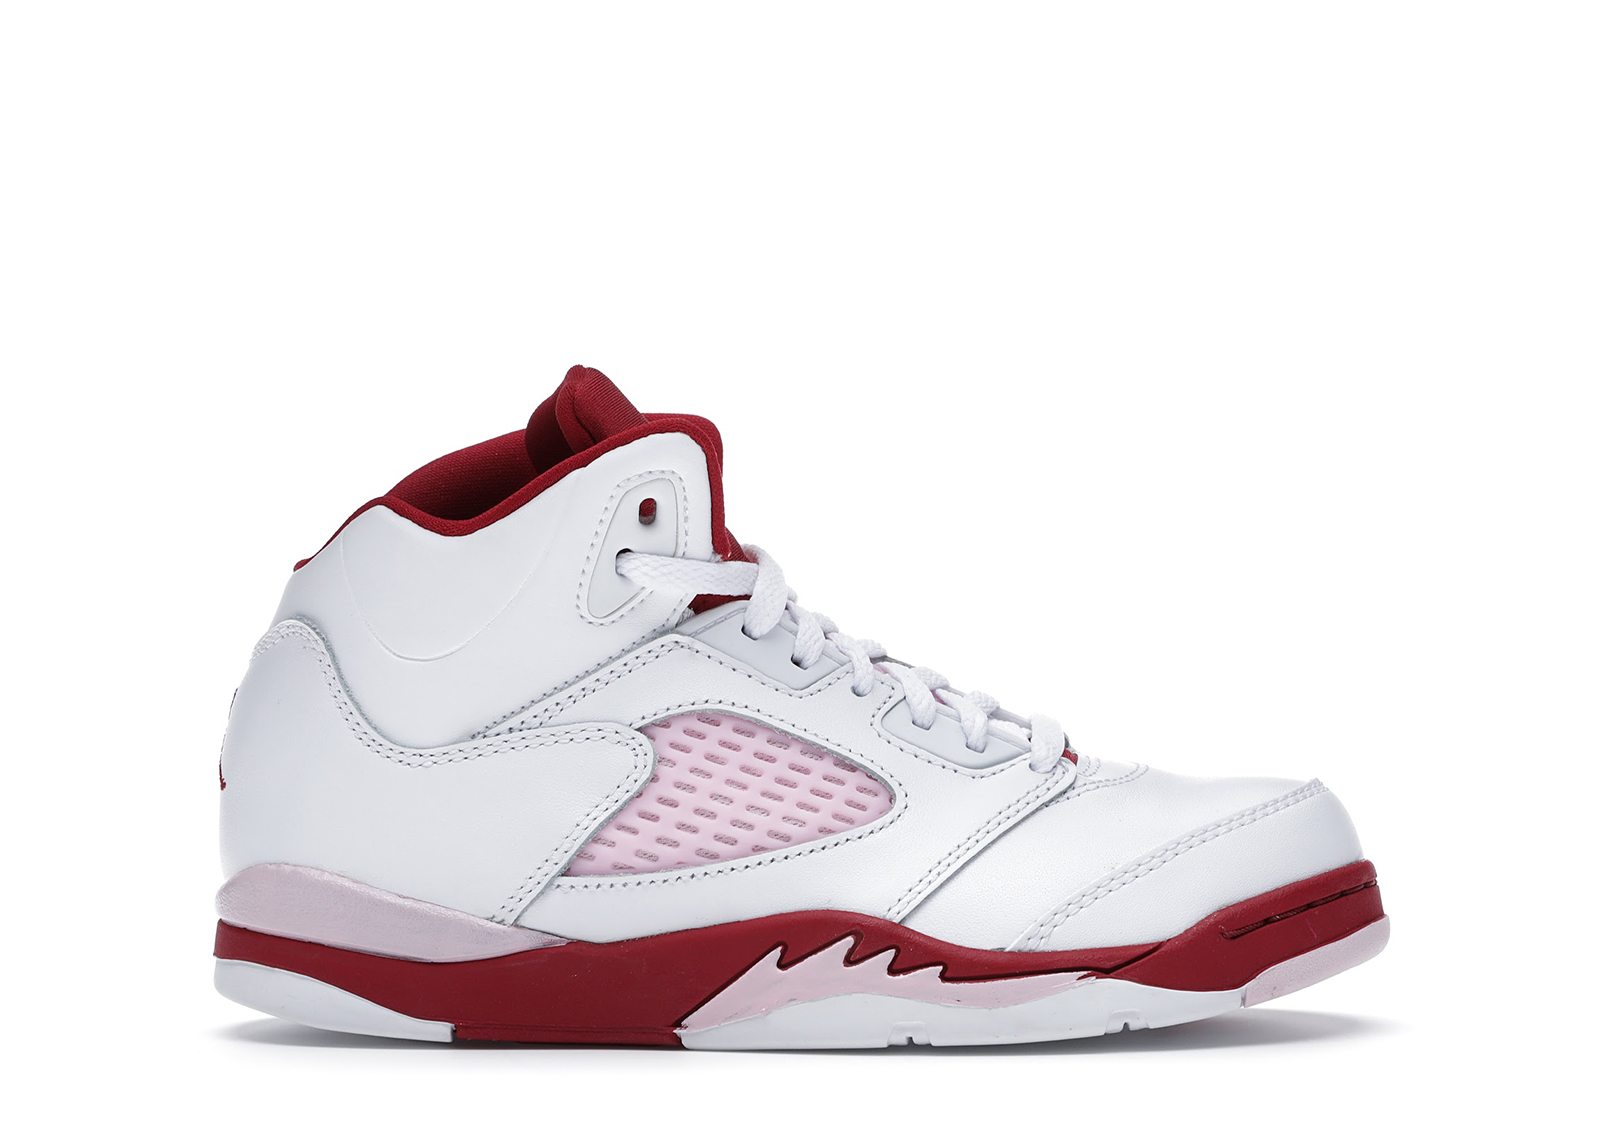 red and white jordan 5